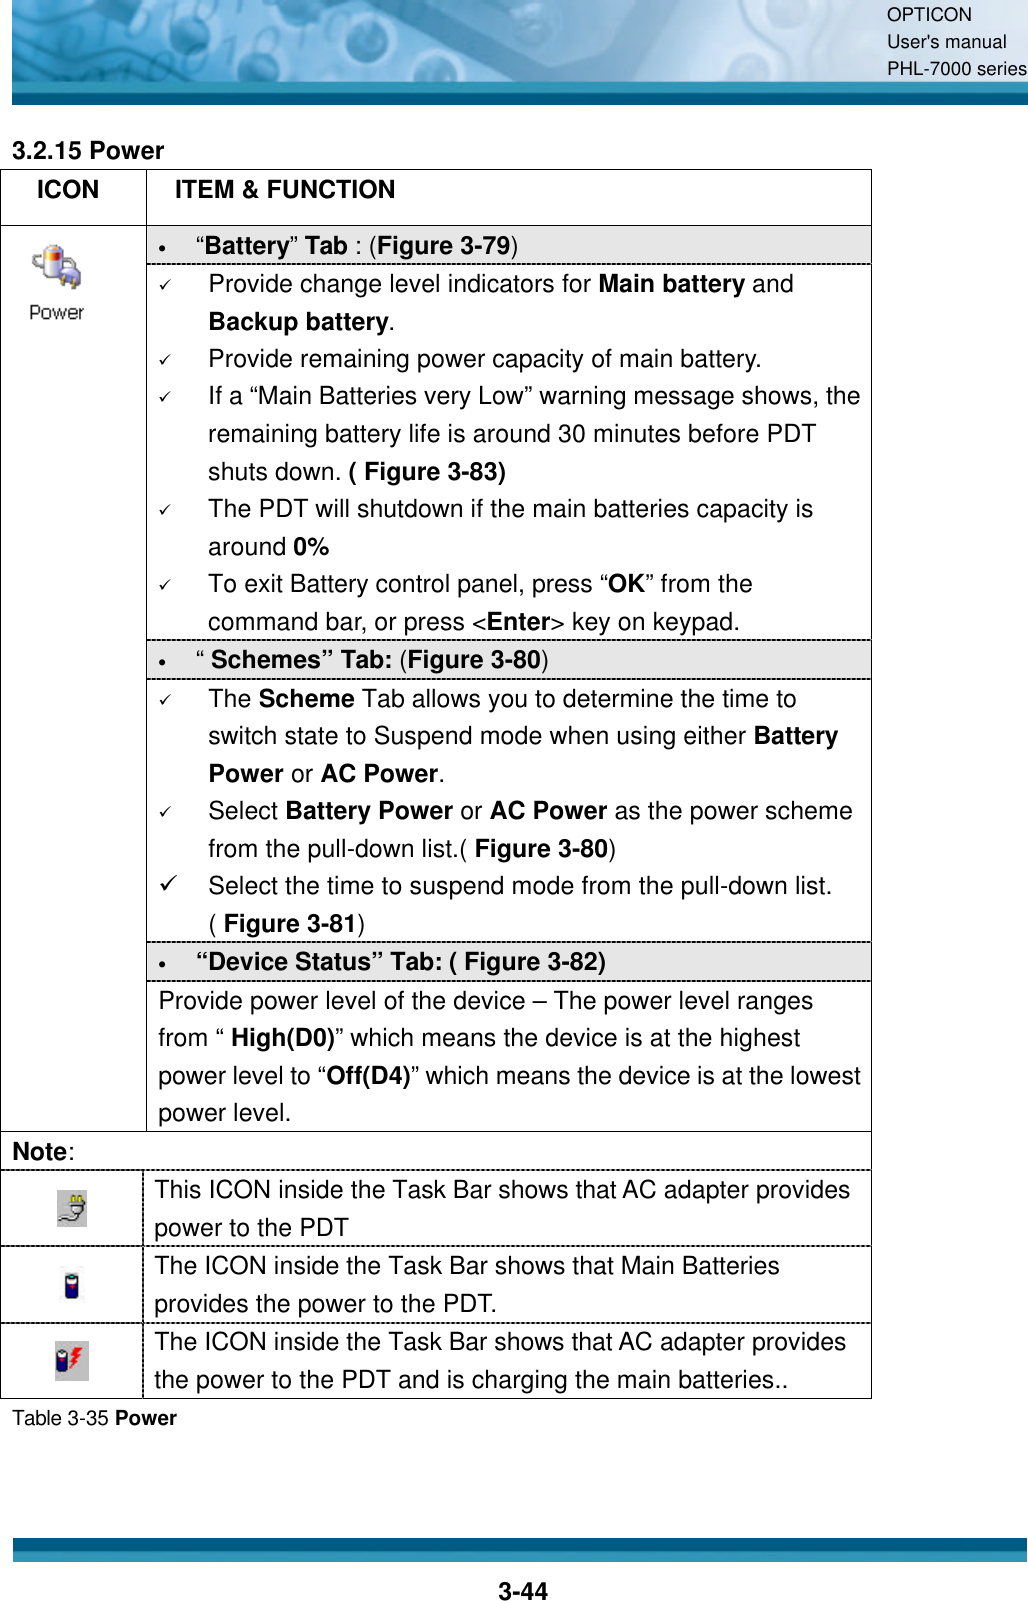 OPTICON User&apos;s manual PHL-7000 series    3-44 3.2.15 Power   ICON  ITEM &amp; FUNCTION • “Battery”  Tab : (Figure 3-79) ü Provide change level indicators for Main battery and Backup battery. ü Provide remaining power capacity of main battery. ü If a “Main Batteries very Low” warning message shows, the remaining battery life is around 30 minutes before PDT shuts down. ( Figure 3-83) ü The PDT will shutdown if the main batteries capacity is around 0% ü To exit Battery control panel, press “OK” from the command bar, or press &lt;Enter&gt; key on keypad. • “ Schemes” Tab: (Figure 3-80) ü The Scheme Tab allows you to determine the time to switch state to Suspend mode when using either Battery Power or AC Power. ü Select Battery Power or AC Power as the power scheme from the pull-down list.( Figure 3-80) ü Select the time to suspend mode from the pull-down list. ( Figure 3-81) • “Device Status” Tab: ( Figure 3-82)  Provide power level of the device – The power level ranges from “ High(D0)” which means the device is at the highest power level to “Off(D4)” which means the device is at the lowest power level. Note:  This ICON inside the Task Bar shows that AC adapter provides power to the PDT  The ICON inside the Task Bar shows that Main Batteries provides the power to the PDT.  The ICON inside the Task Bar shows that AC adapter provides the power to the PDT and is charging the main batteries.. Table 3-35 Power  